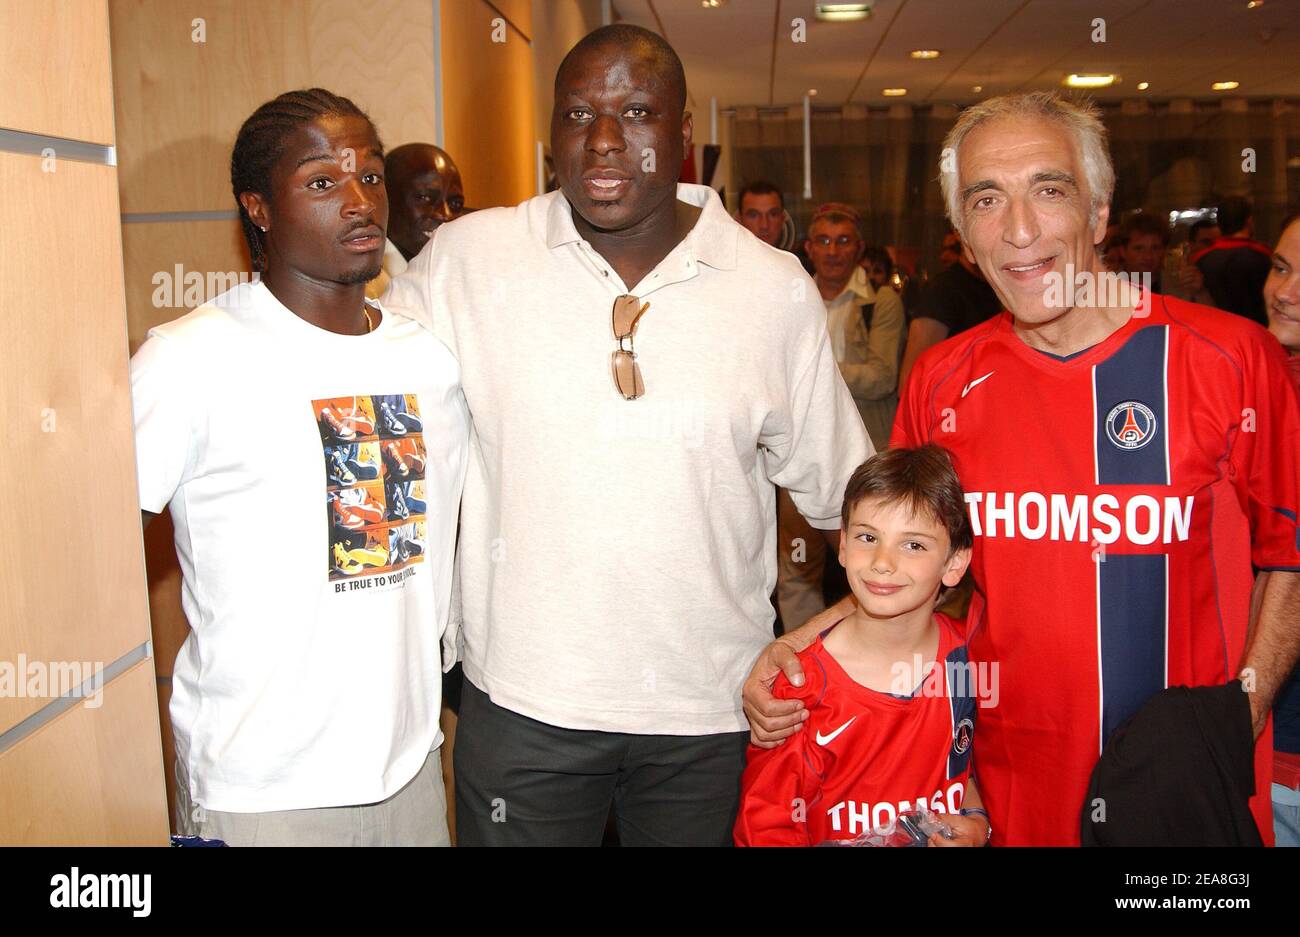 PSG soccer player Bernard Mendy (L), French actors Mouss Diouf (C) and Gerard Darmon with his son pictured at the party for the presentation of the PSG soccer team's new shirt made by sponsor Nike at the Parc des Princes stadium in Paris-France on June 29, 2004. Photo by Bruno Klein/ABACA. Stock Photo